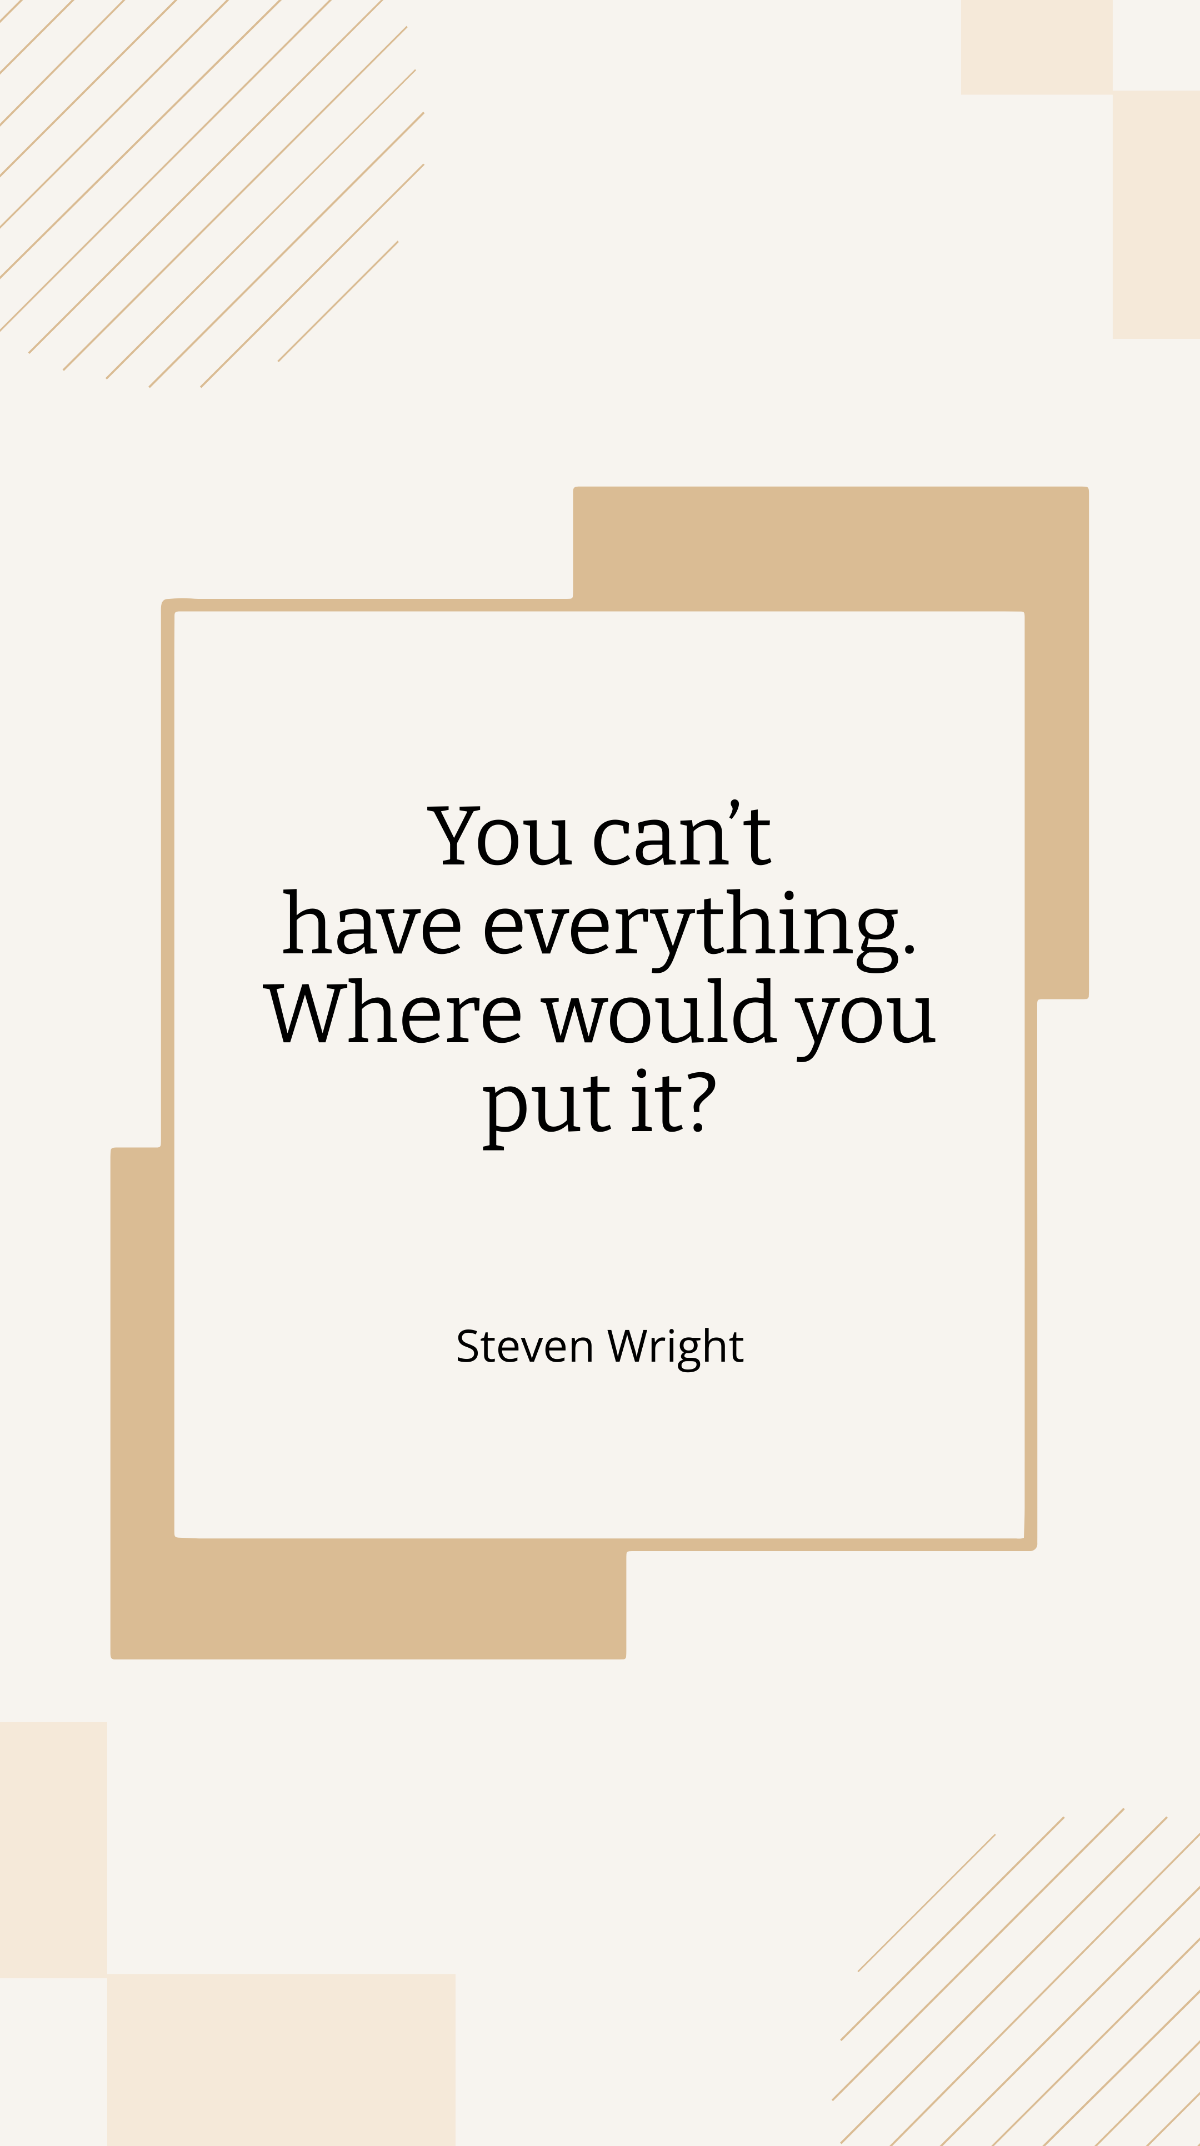 Steven Wright - “You can’t have everything. Where would you put it?”